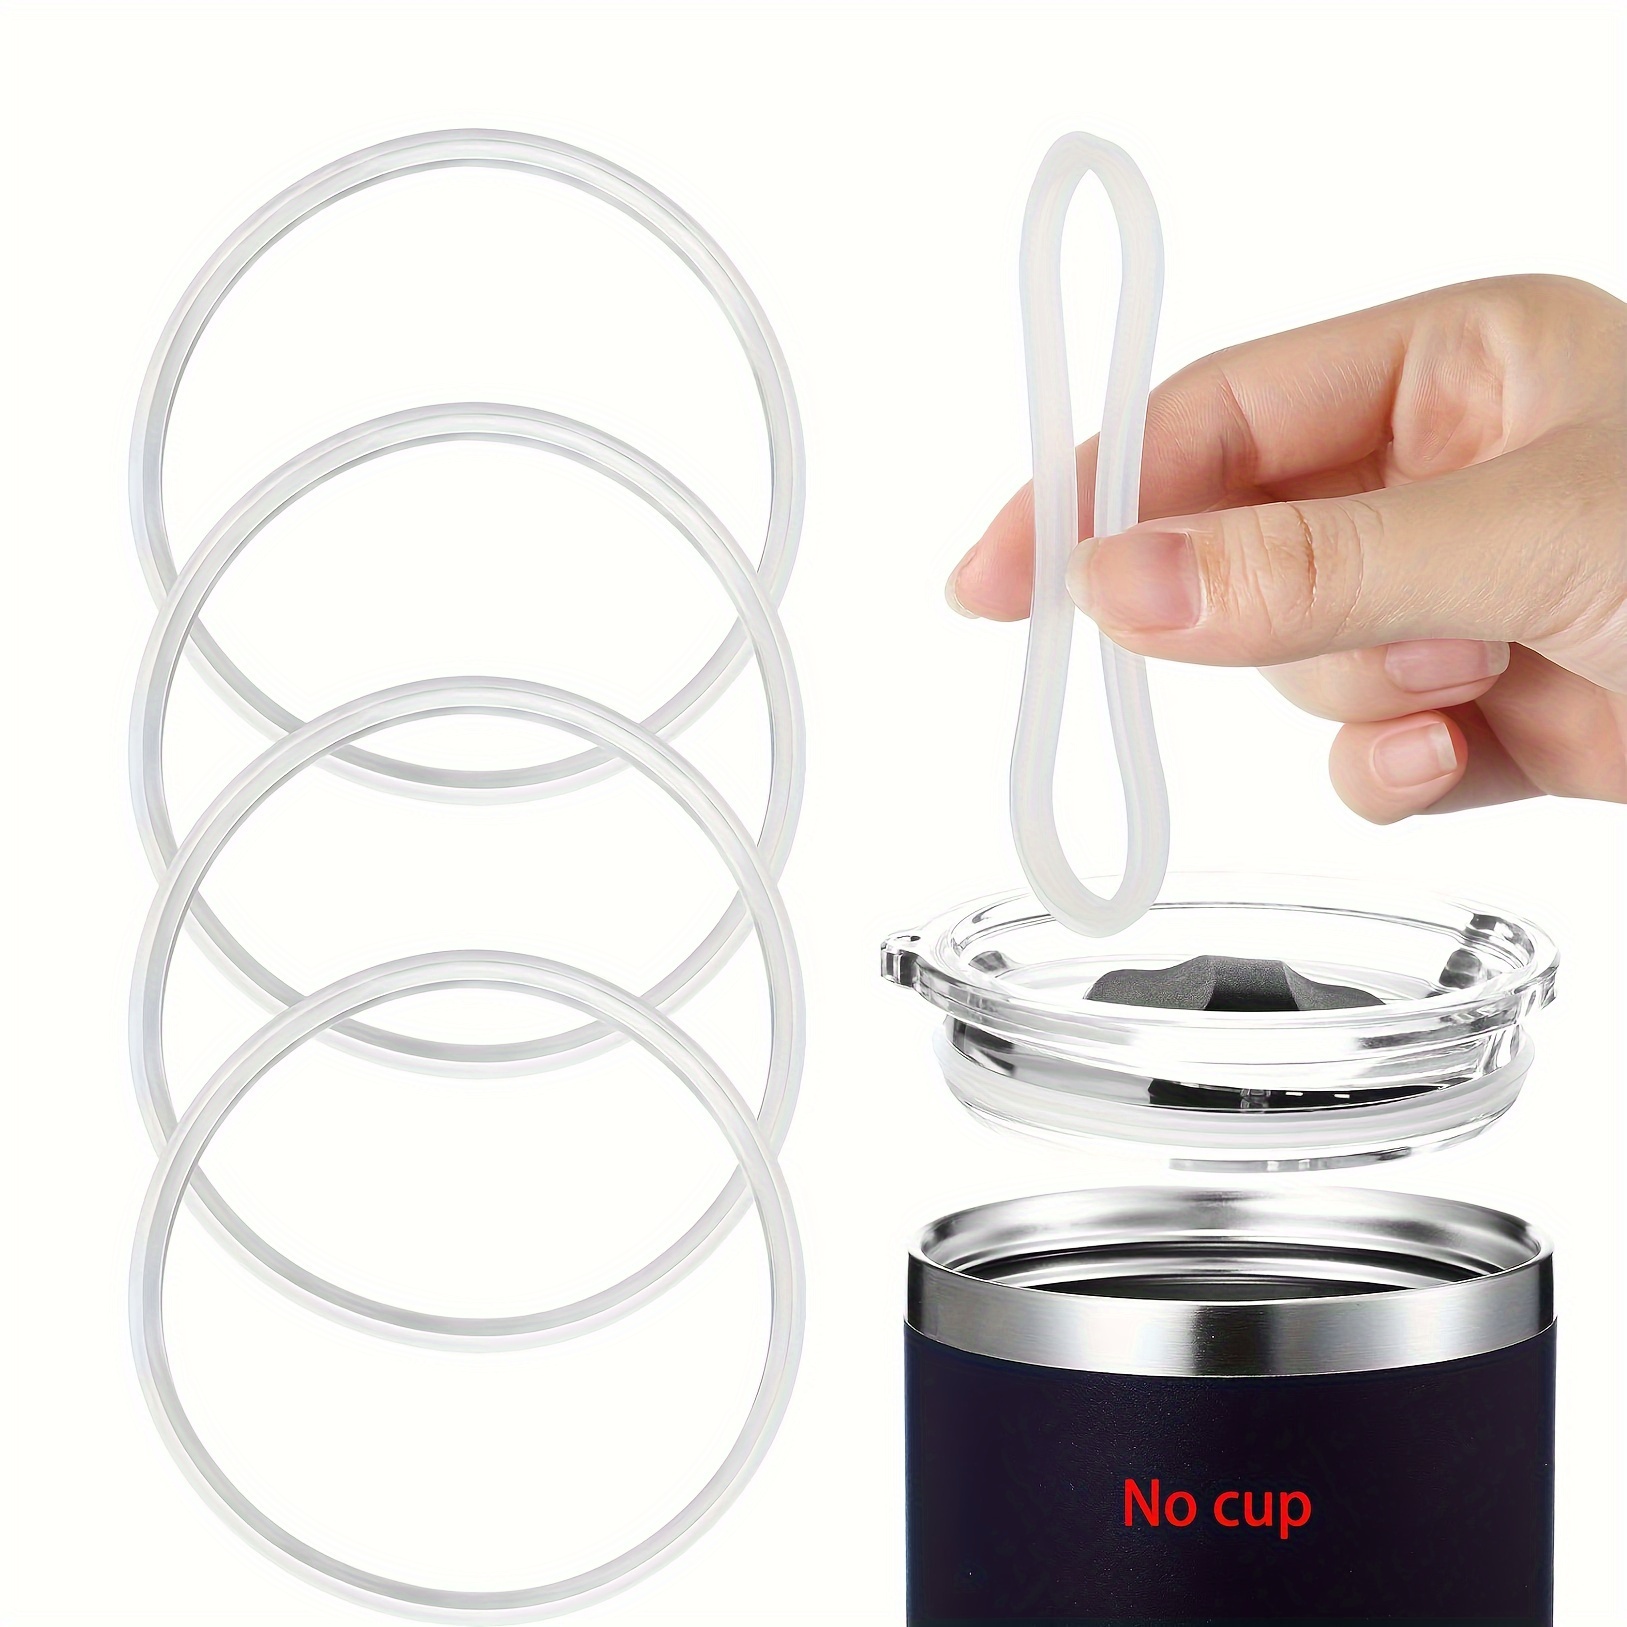 

4pcs Silicone Sealing Rings Set, Leakproof Gaskets, Fits 10oz To 40oz Stainless Steel Flat Bottom Sports Bottles